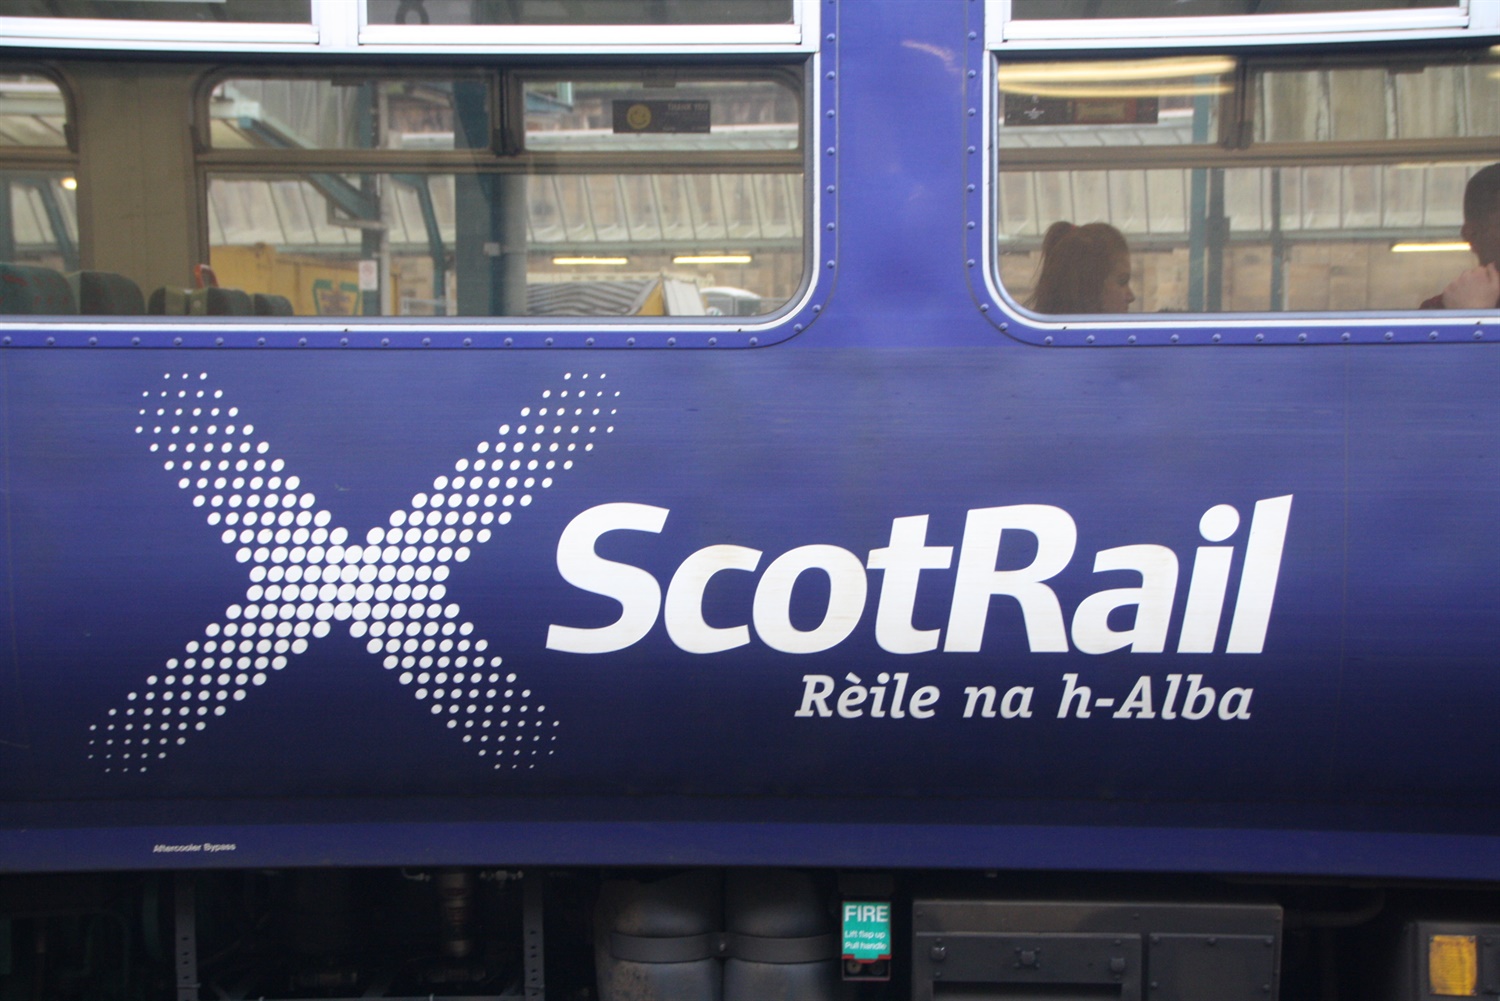 Public sector body ‘ready to take over’ ScotRail if issues persist